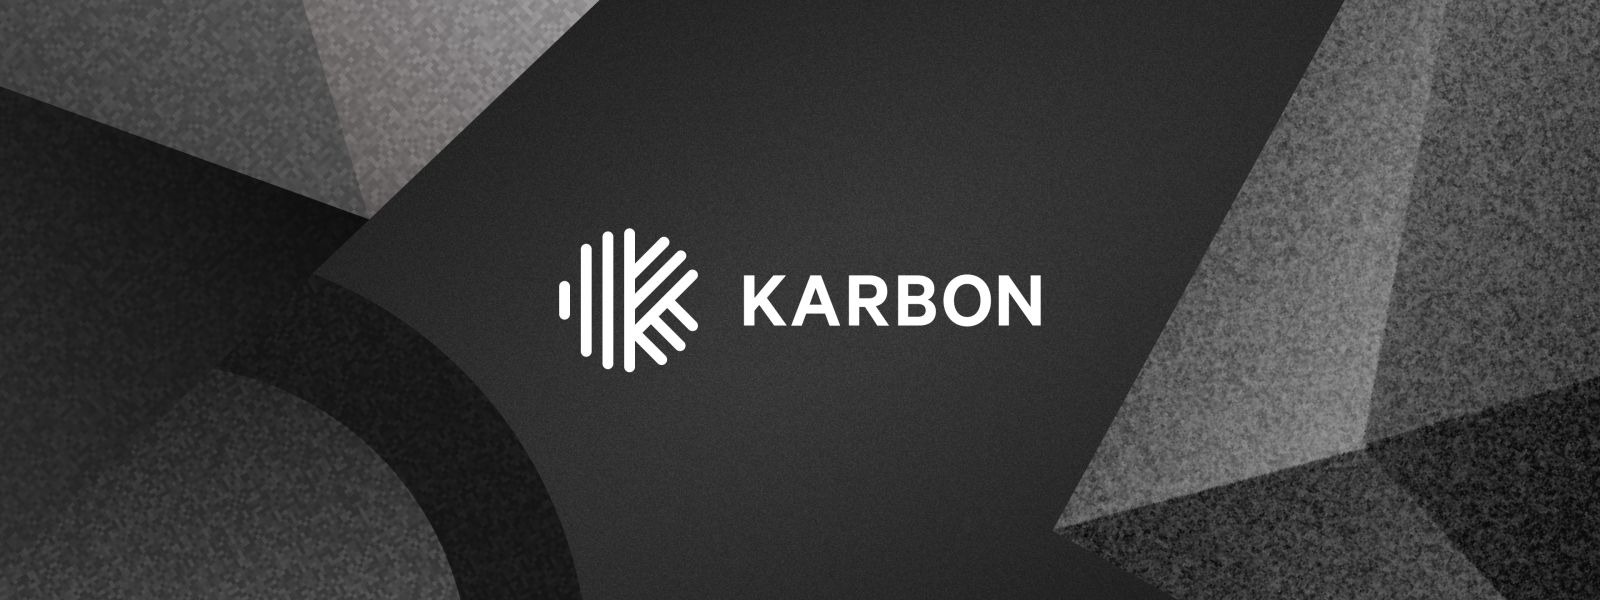 A hero image for the press release that is announcing Karbon AI. It's a greyscale image with the Karbon logo in white and centered, with texture geometric shapes overlayed in the background.